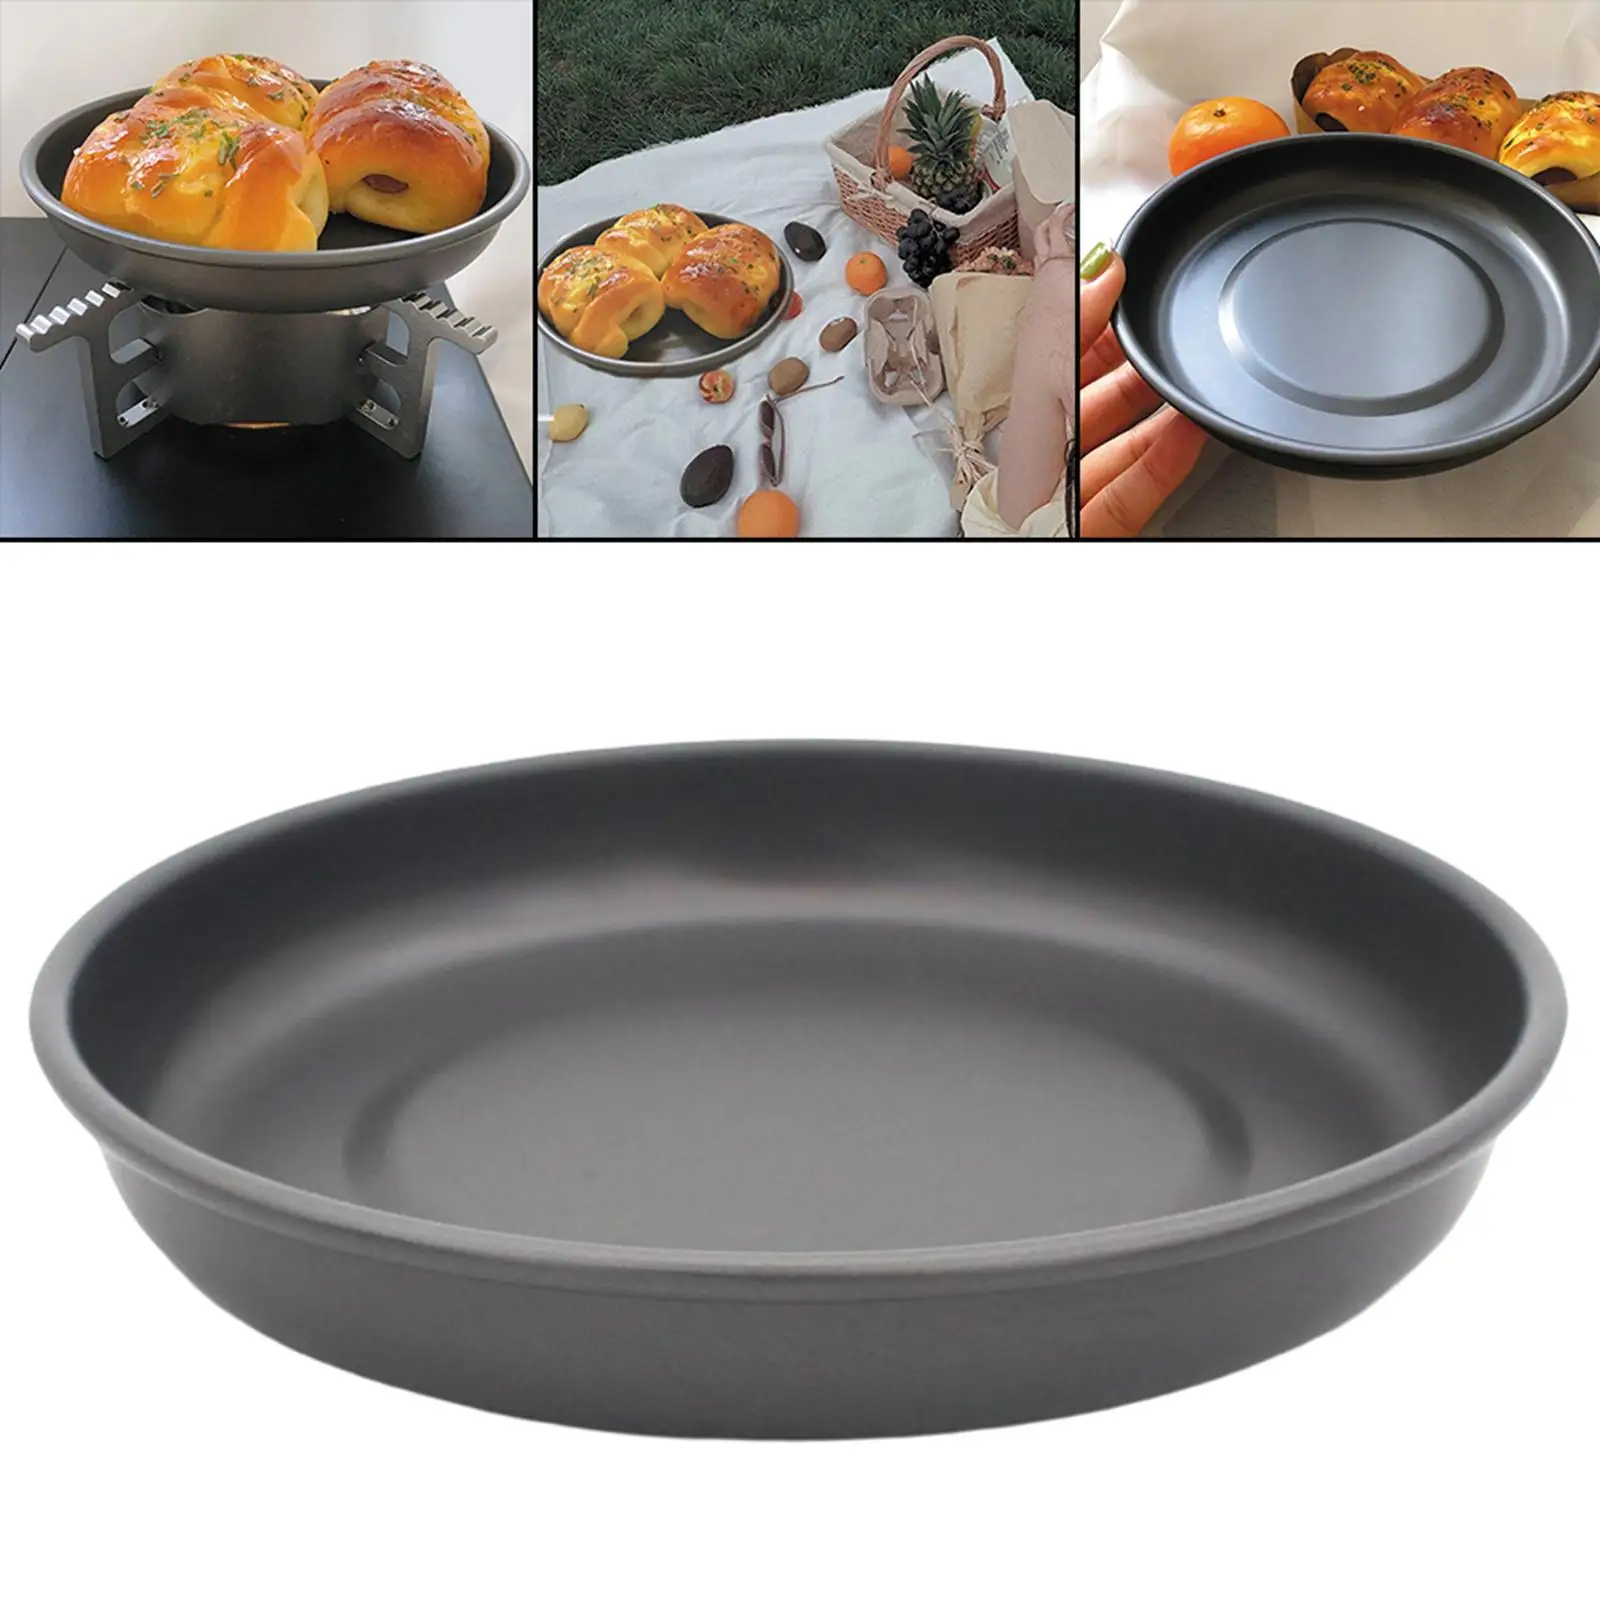 Food Plate Round Dish Tray Cooking Utensil for Camping Fishing Beach Backpacking